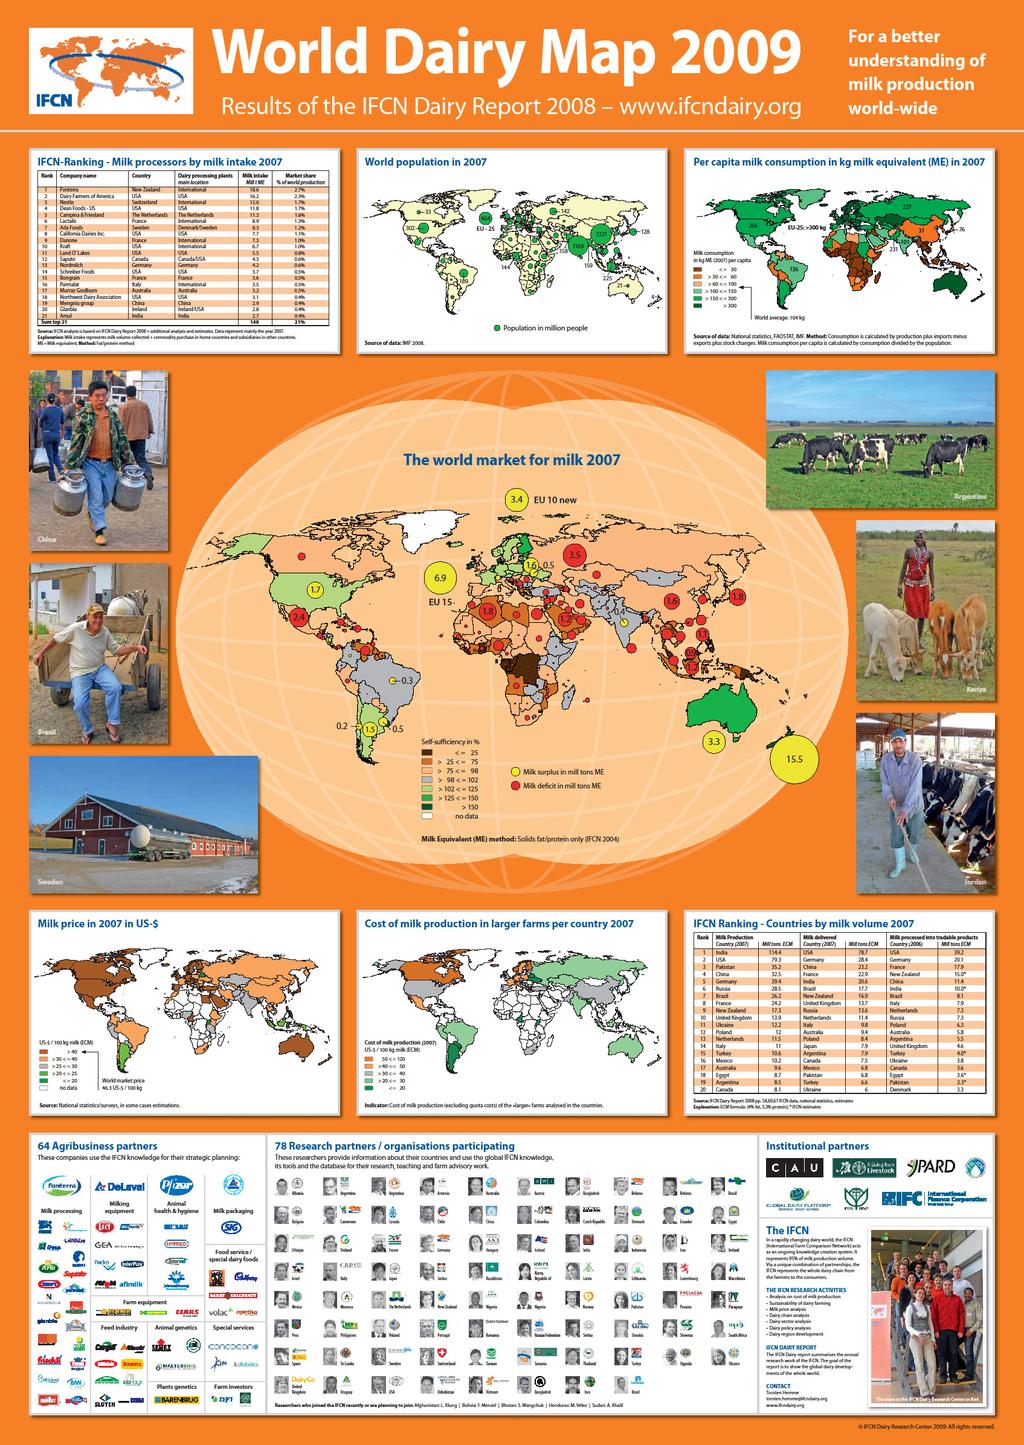 The World Dairy Map 2009